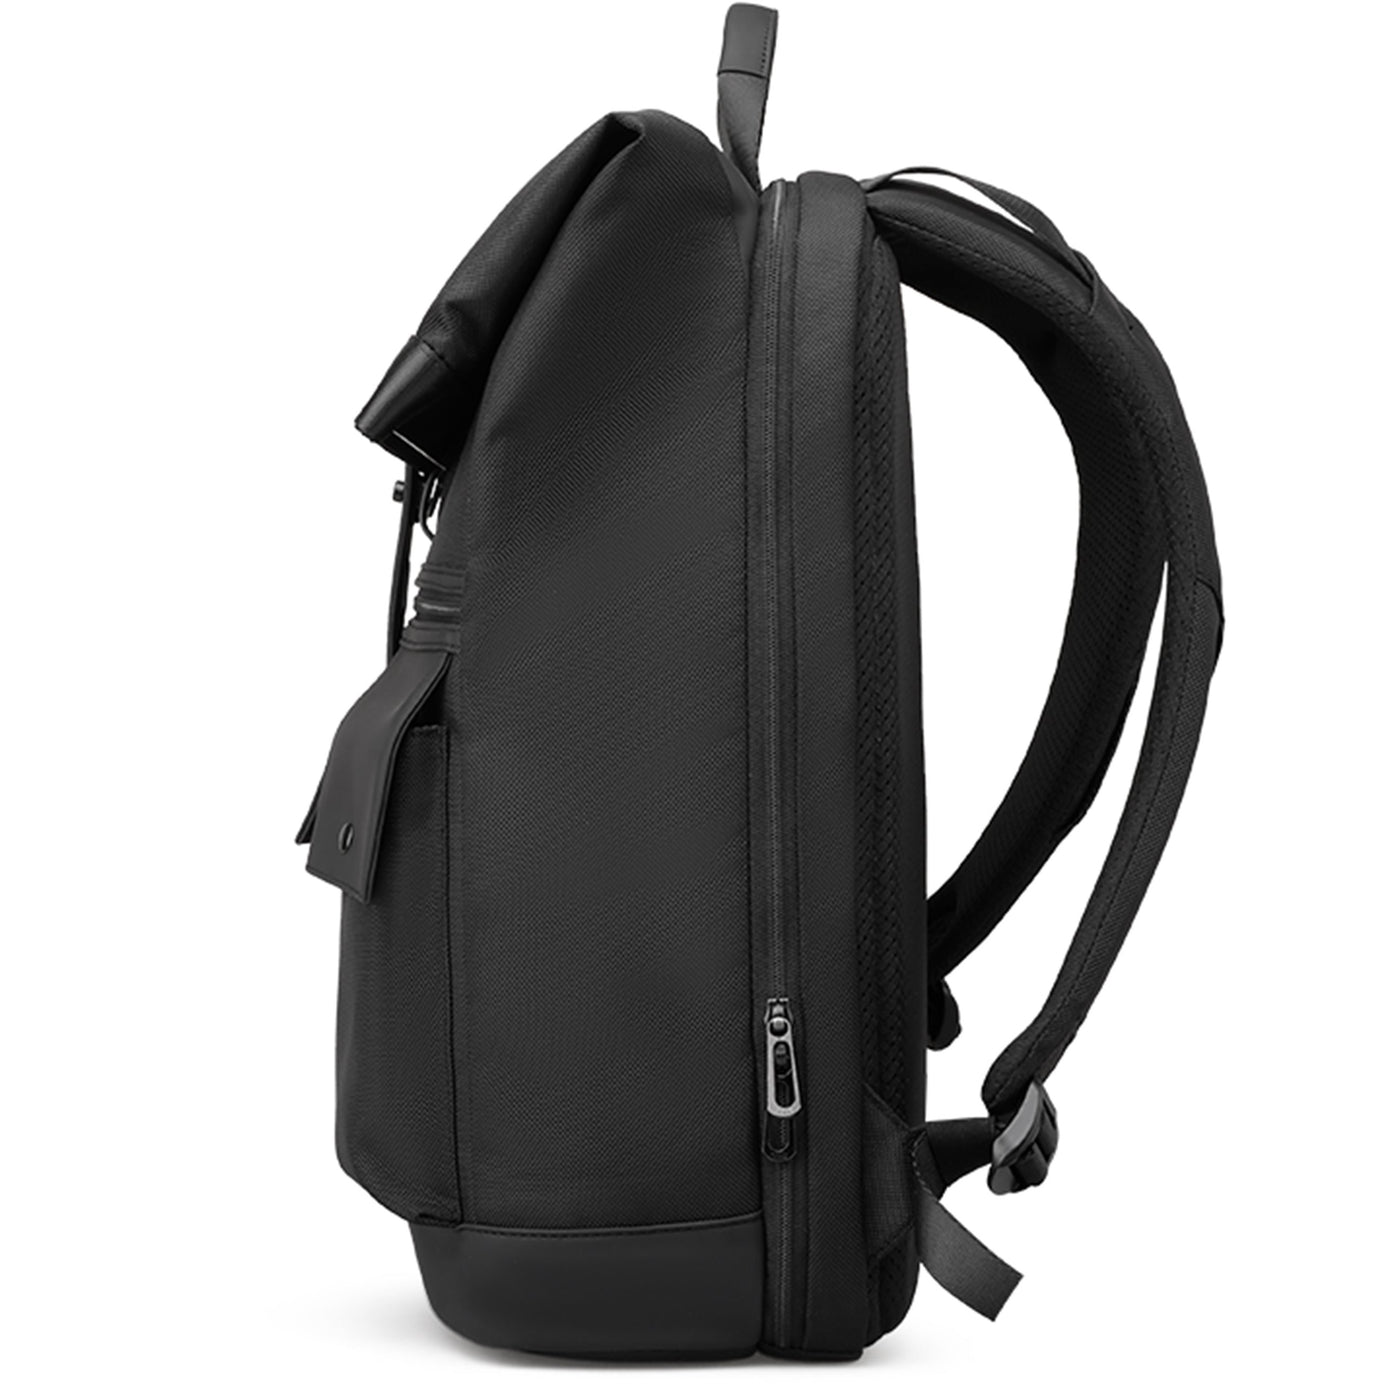 Mark Ryden Local Daily Commuter Style Laptop Backpack